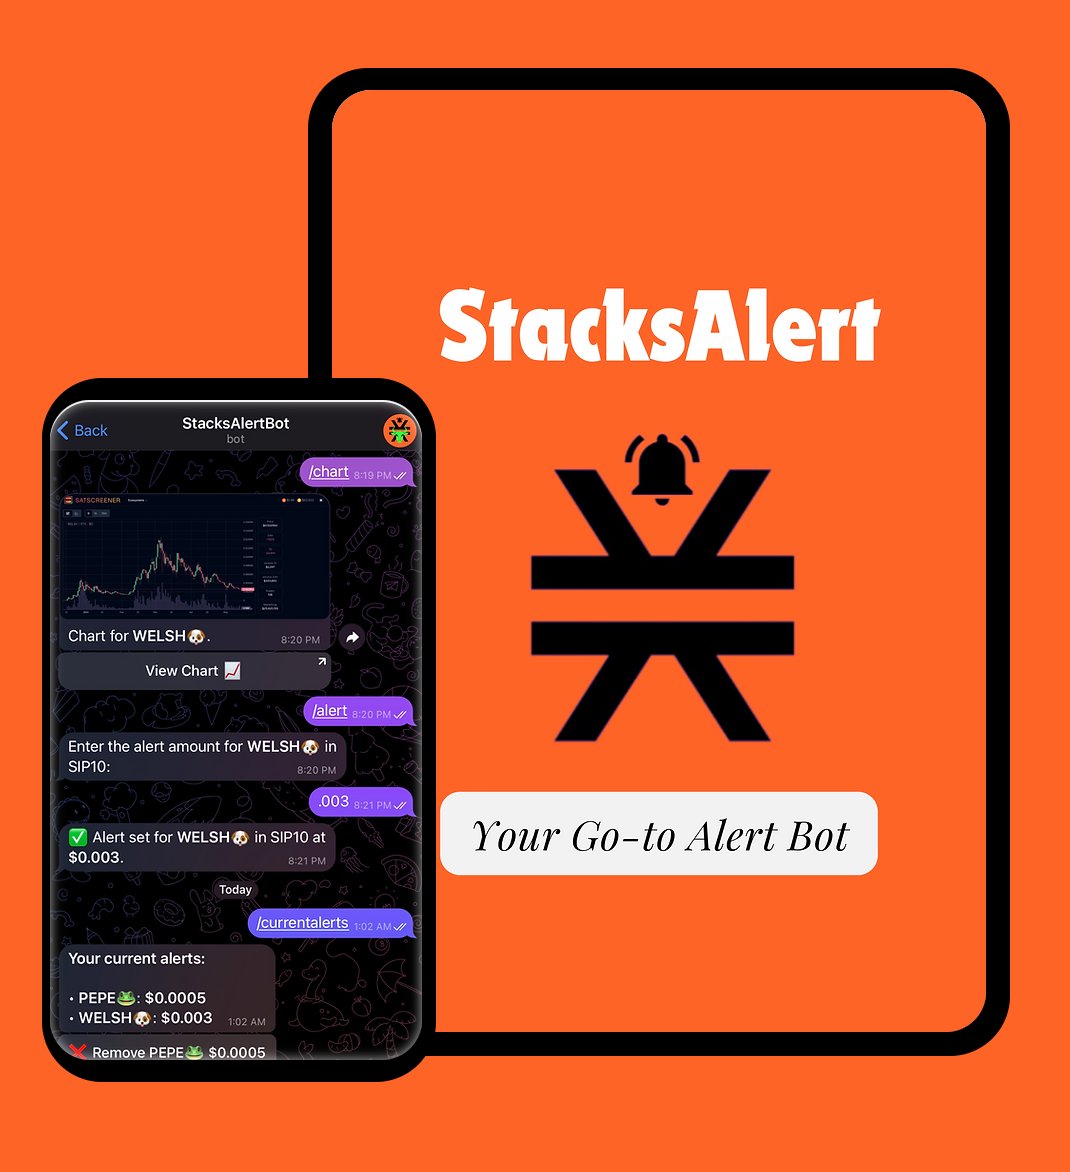 Shoutout to StacksAlert by @BucketHatCrew / @StacksAlert offers: Price Alerts: Track token prices and get alerts. Portfolio Tracking: View whale holdings by wallet address. In-App Charts: Access charts in Telegram. High-Speed: Sub-1 second response times. 24/7 Operation: No